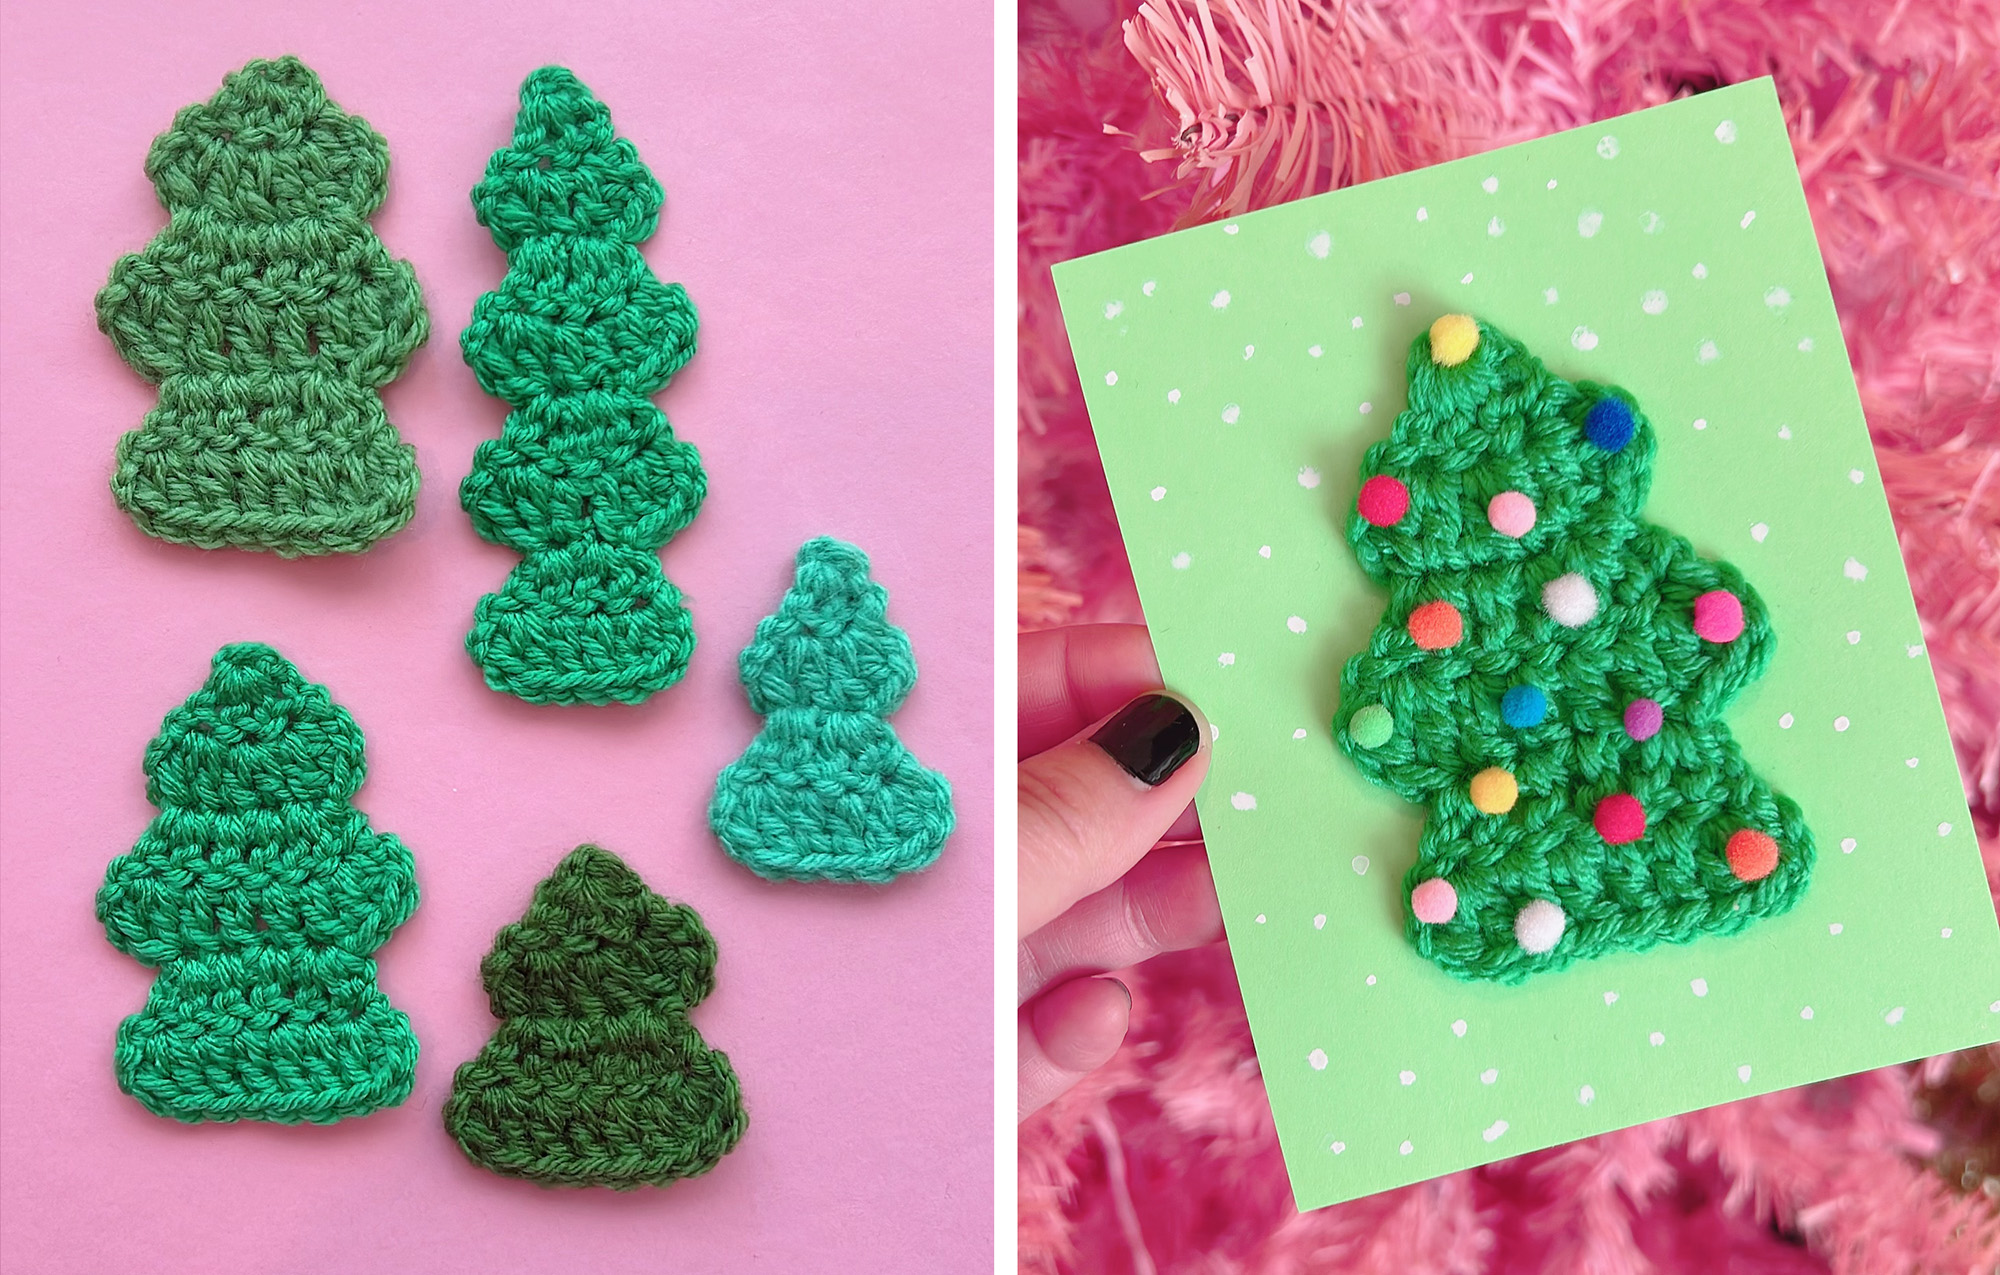 photo collage - on the left, a collection of small crocheted Christmas tree appliqués in various greens on pink background - on the right, a hand holding a crocheted tree appliqué on a holiday card decorated with white watercolor polka dots with a pink Christmas tree in the background